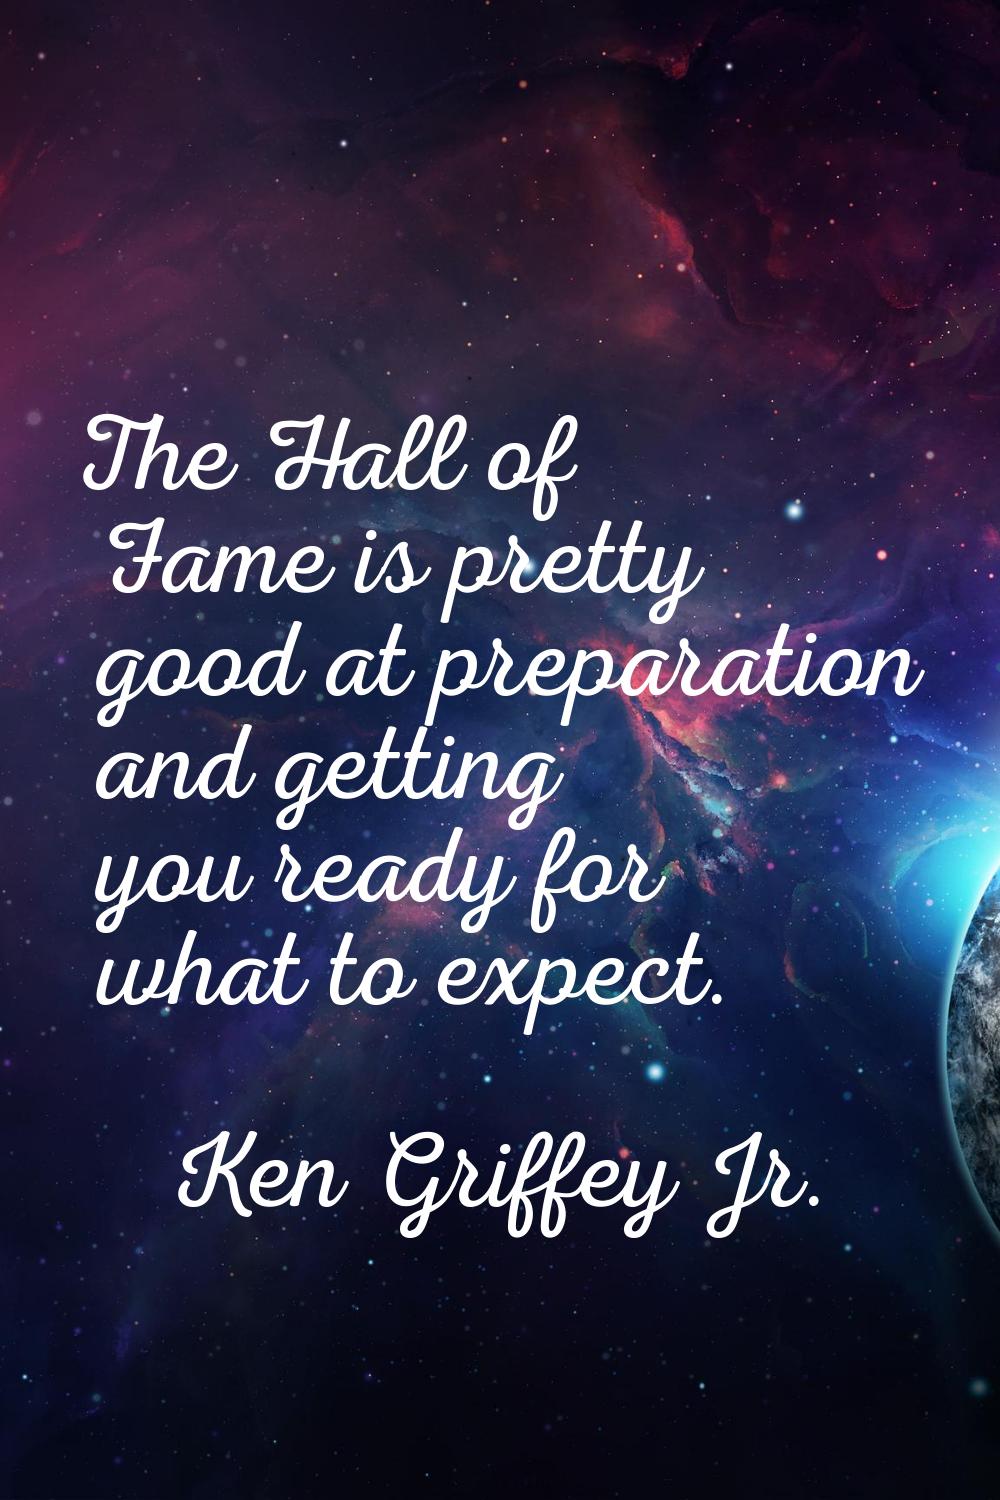 The Hall of Fame is pretty good at preparation and getting you ready for what to expect.